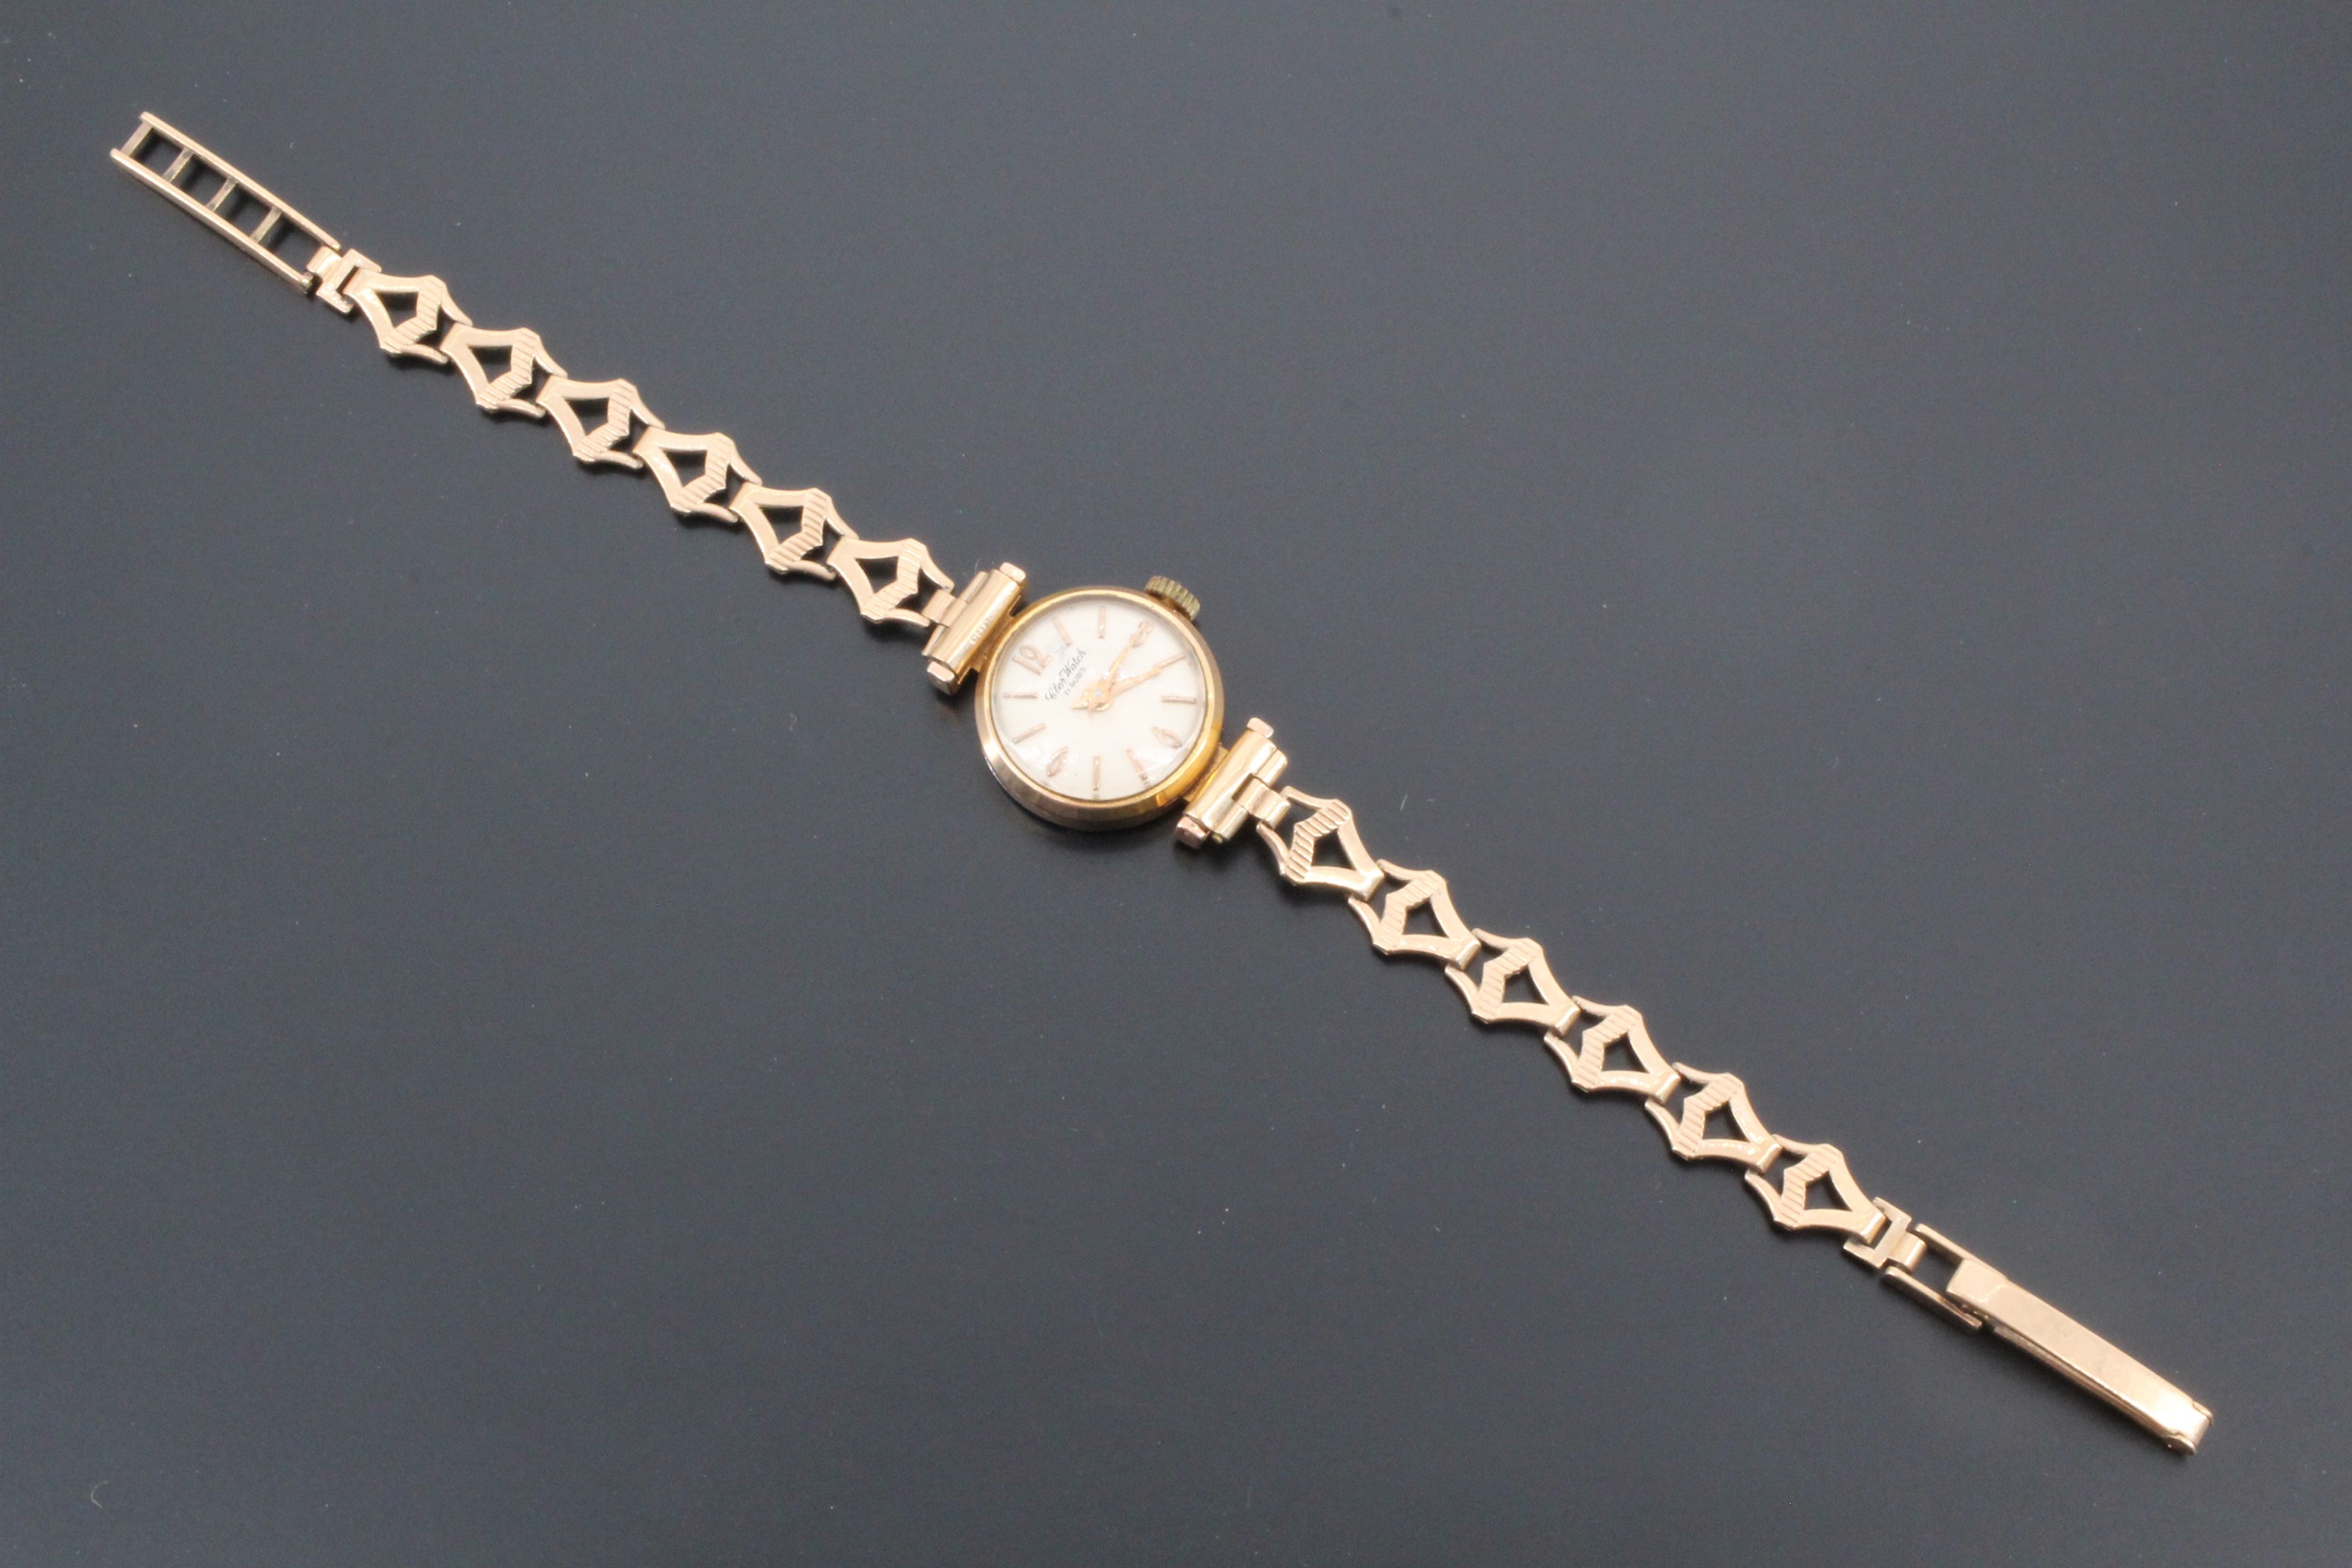 A late 1960s lady's Cler dress watch, having a gold plated case and 9 ct gold flexible bracelet